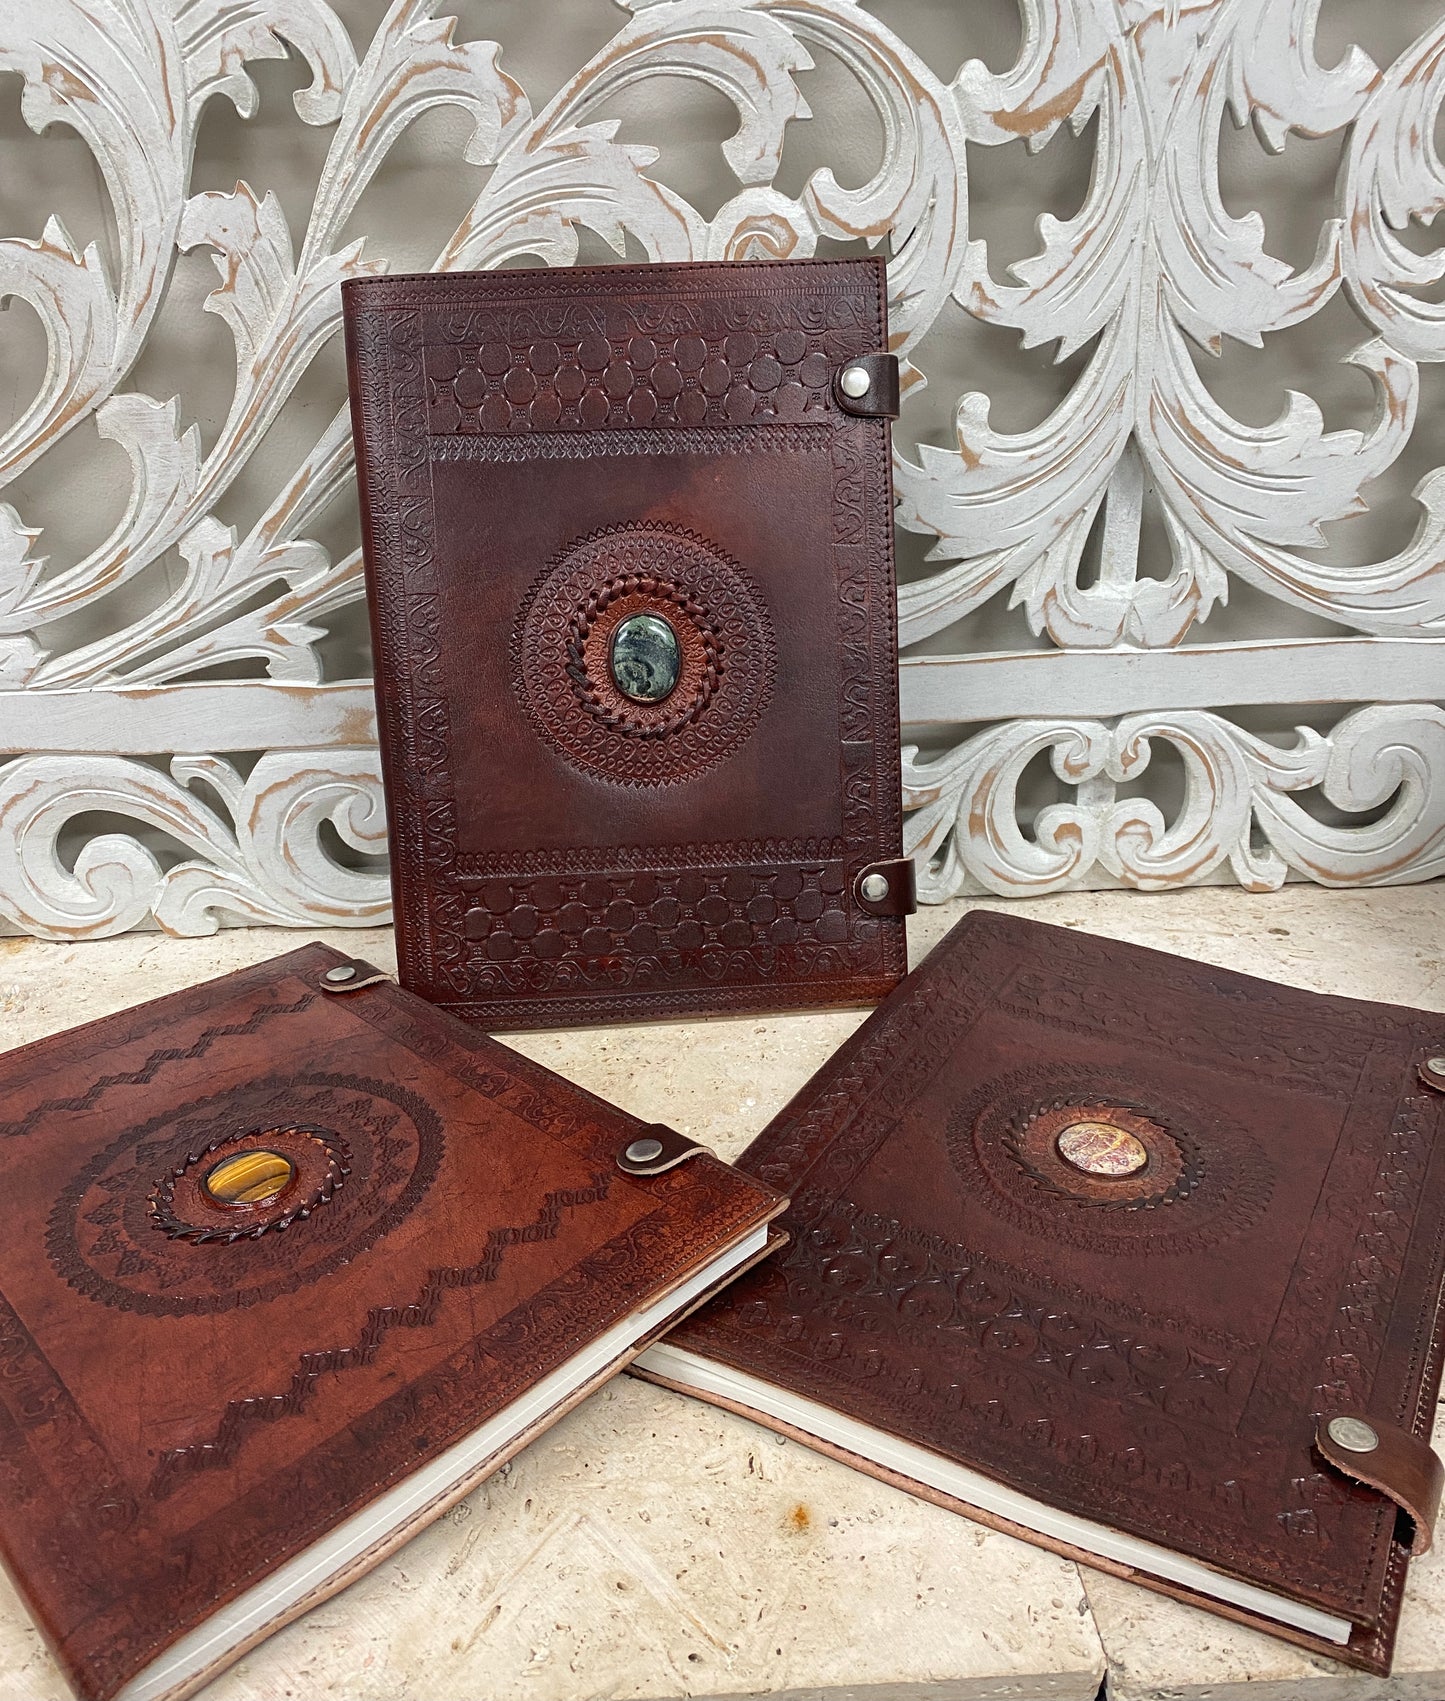 Refillable Hand Embossed Camel leather Journal or Sketch book with Gemstones & Button Clasp - 12.5" x 9" x 1/2"